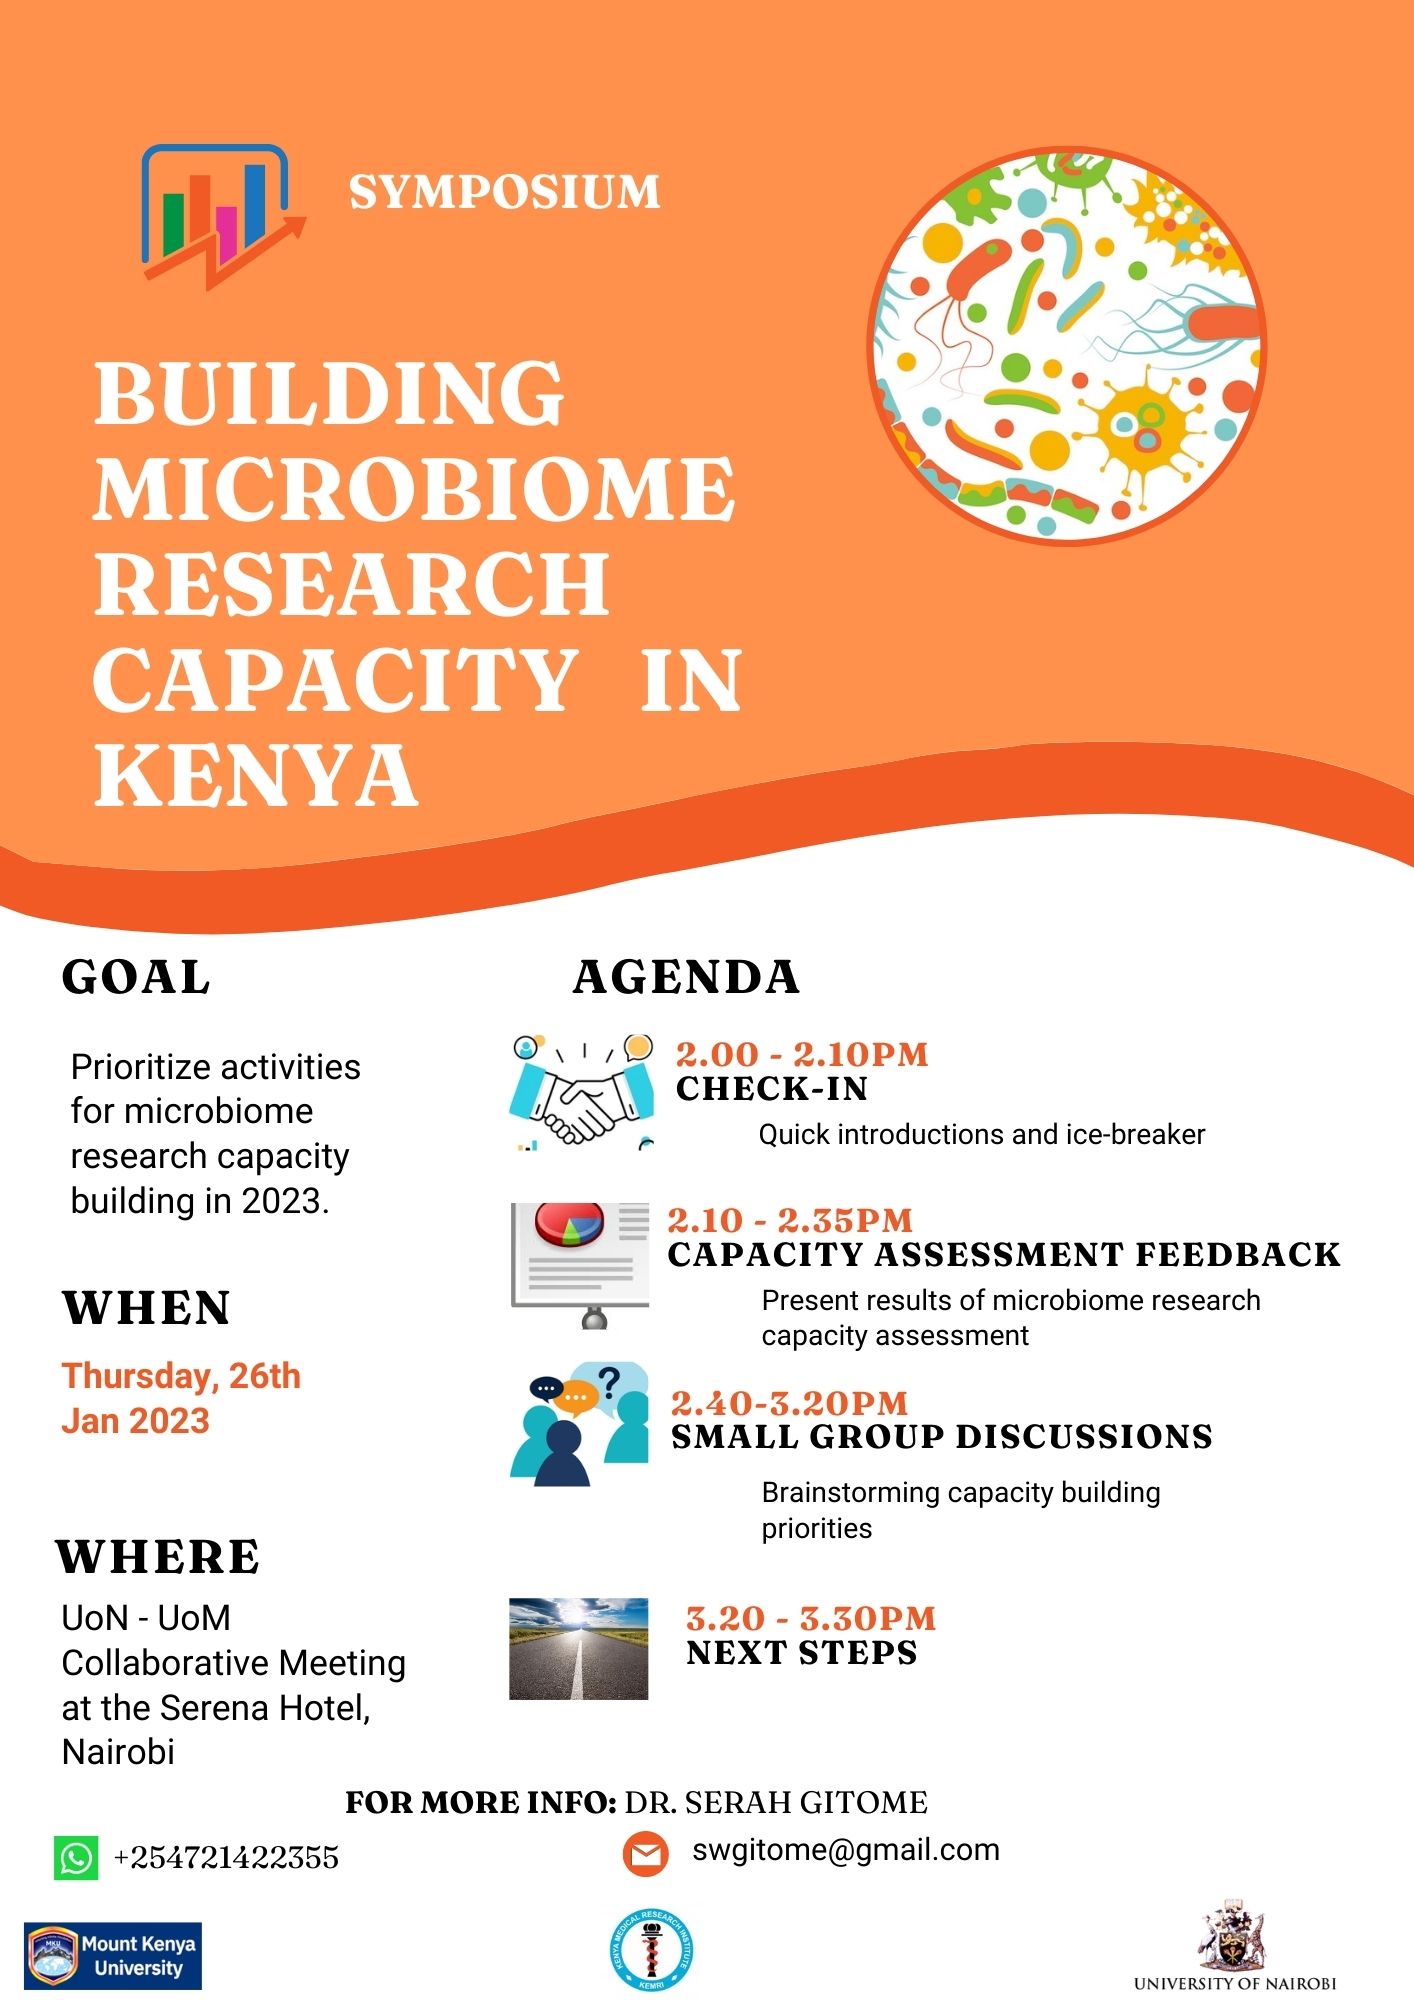 Symposium title: Building Microbiome Research Capacity in Kenya